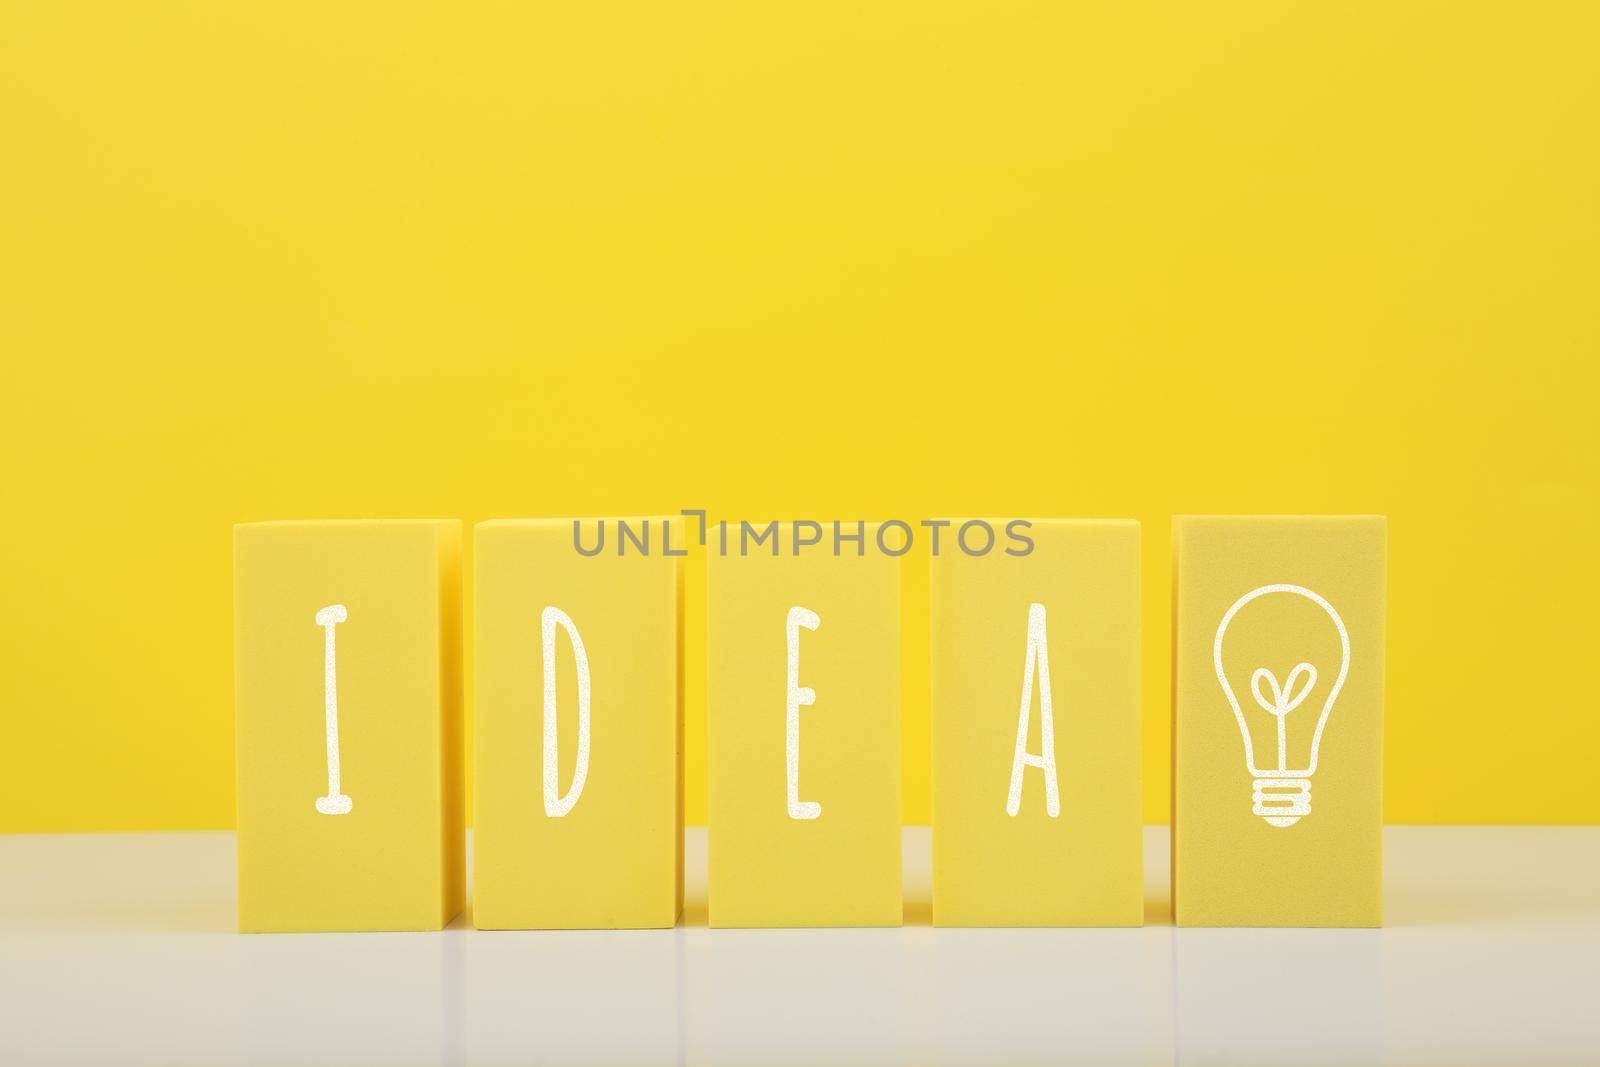 Concept of idea, creativity, start up or brainstorming. The word idea and bulb drawn on yellow toy blocks against bright yellow background with copy space.